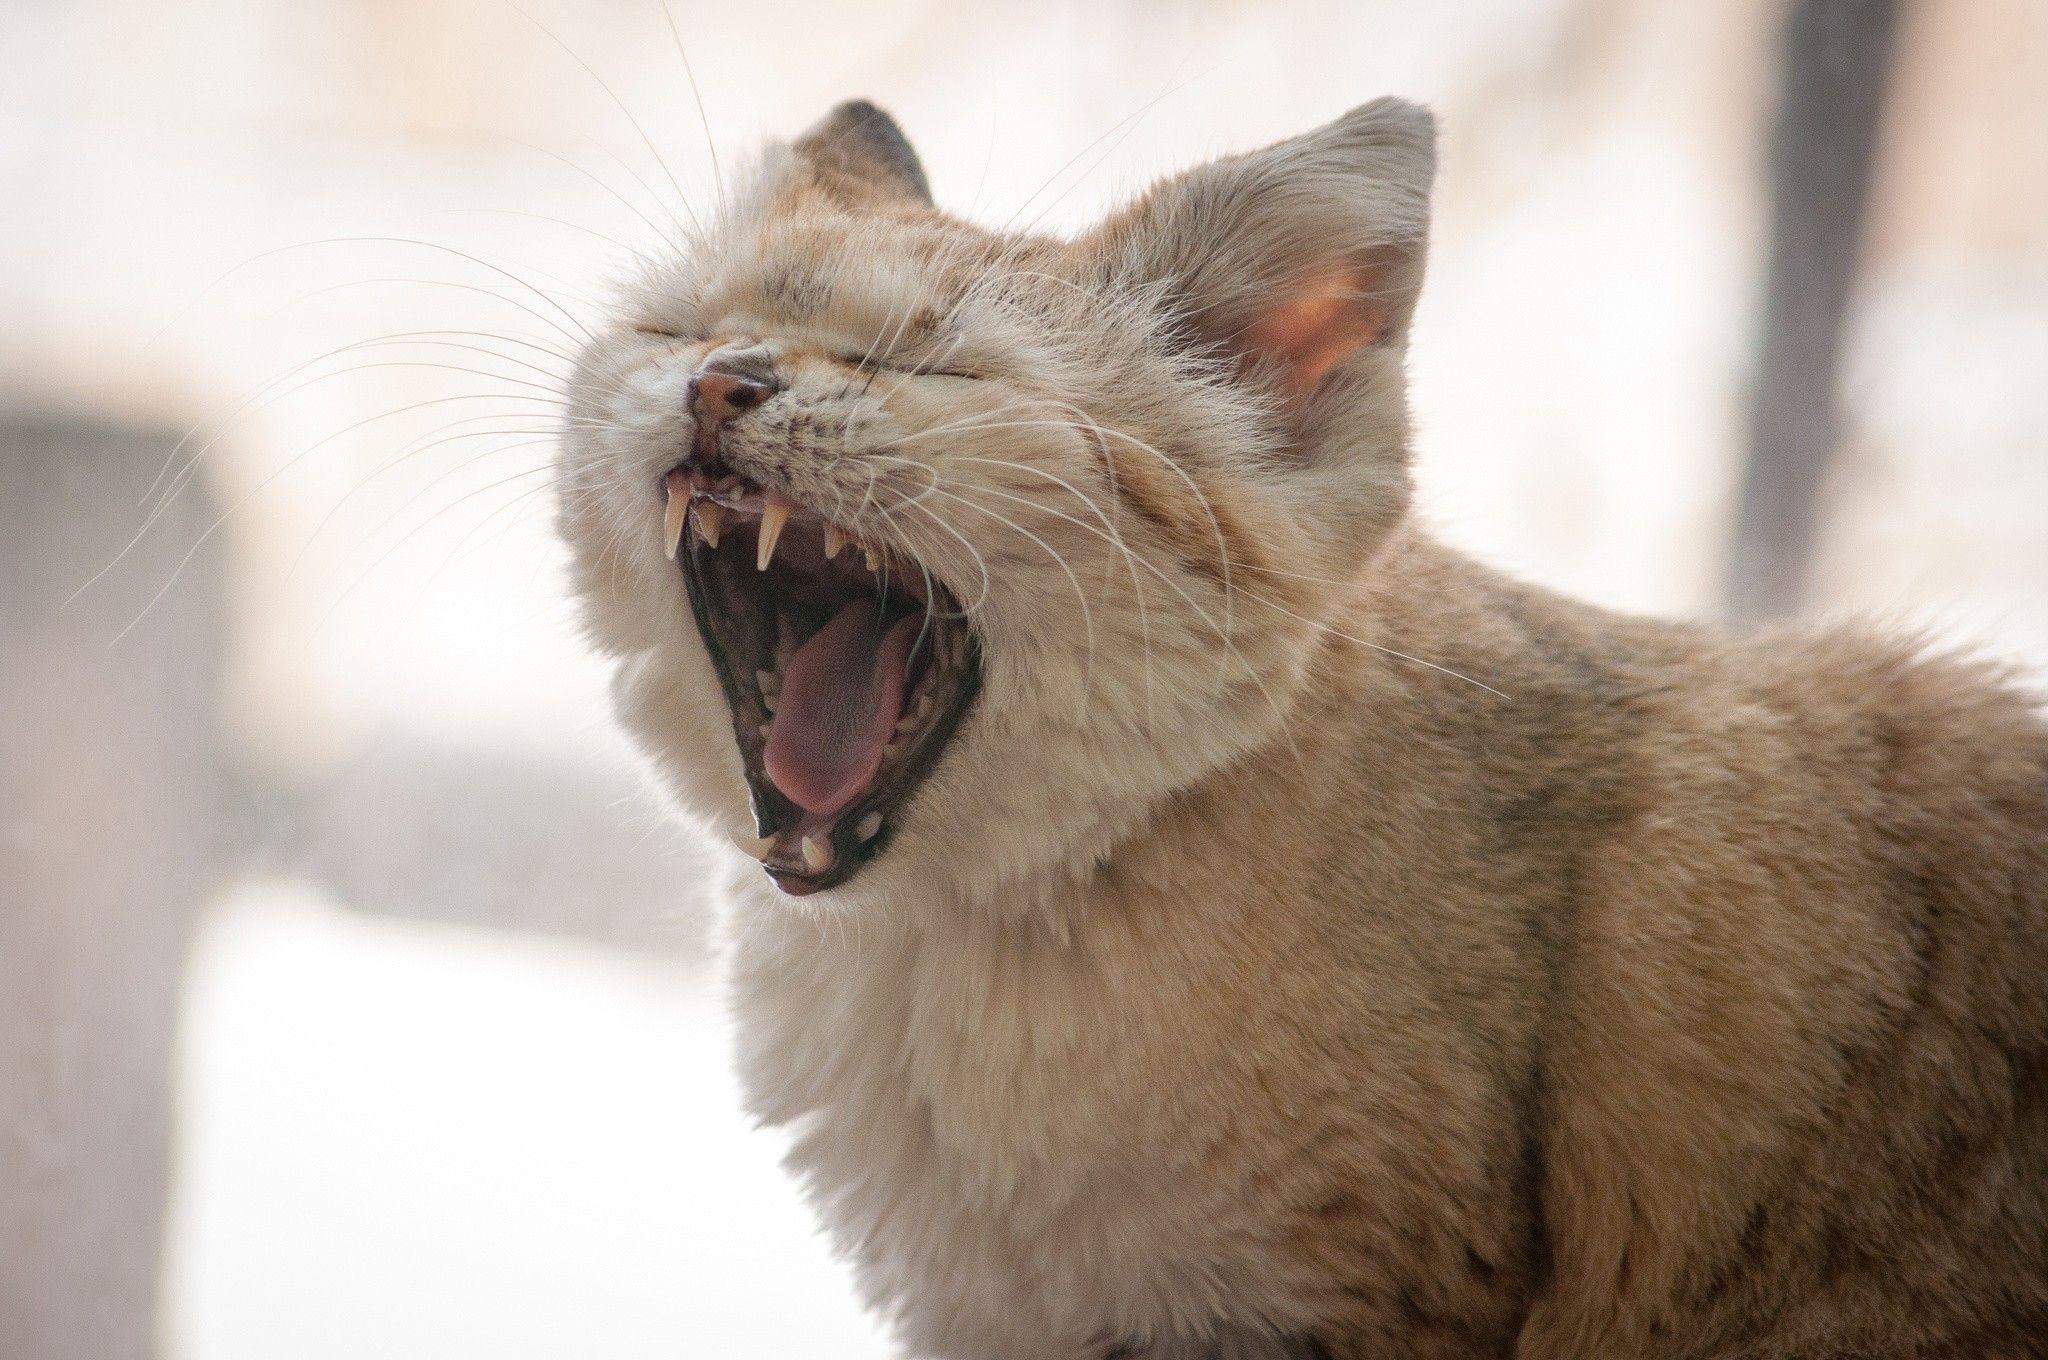 Cats: Cat Sand Pussycat Yawn Cats Picture Wallpaper for HD 16:9